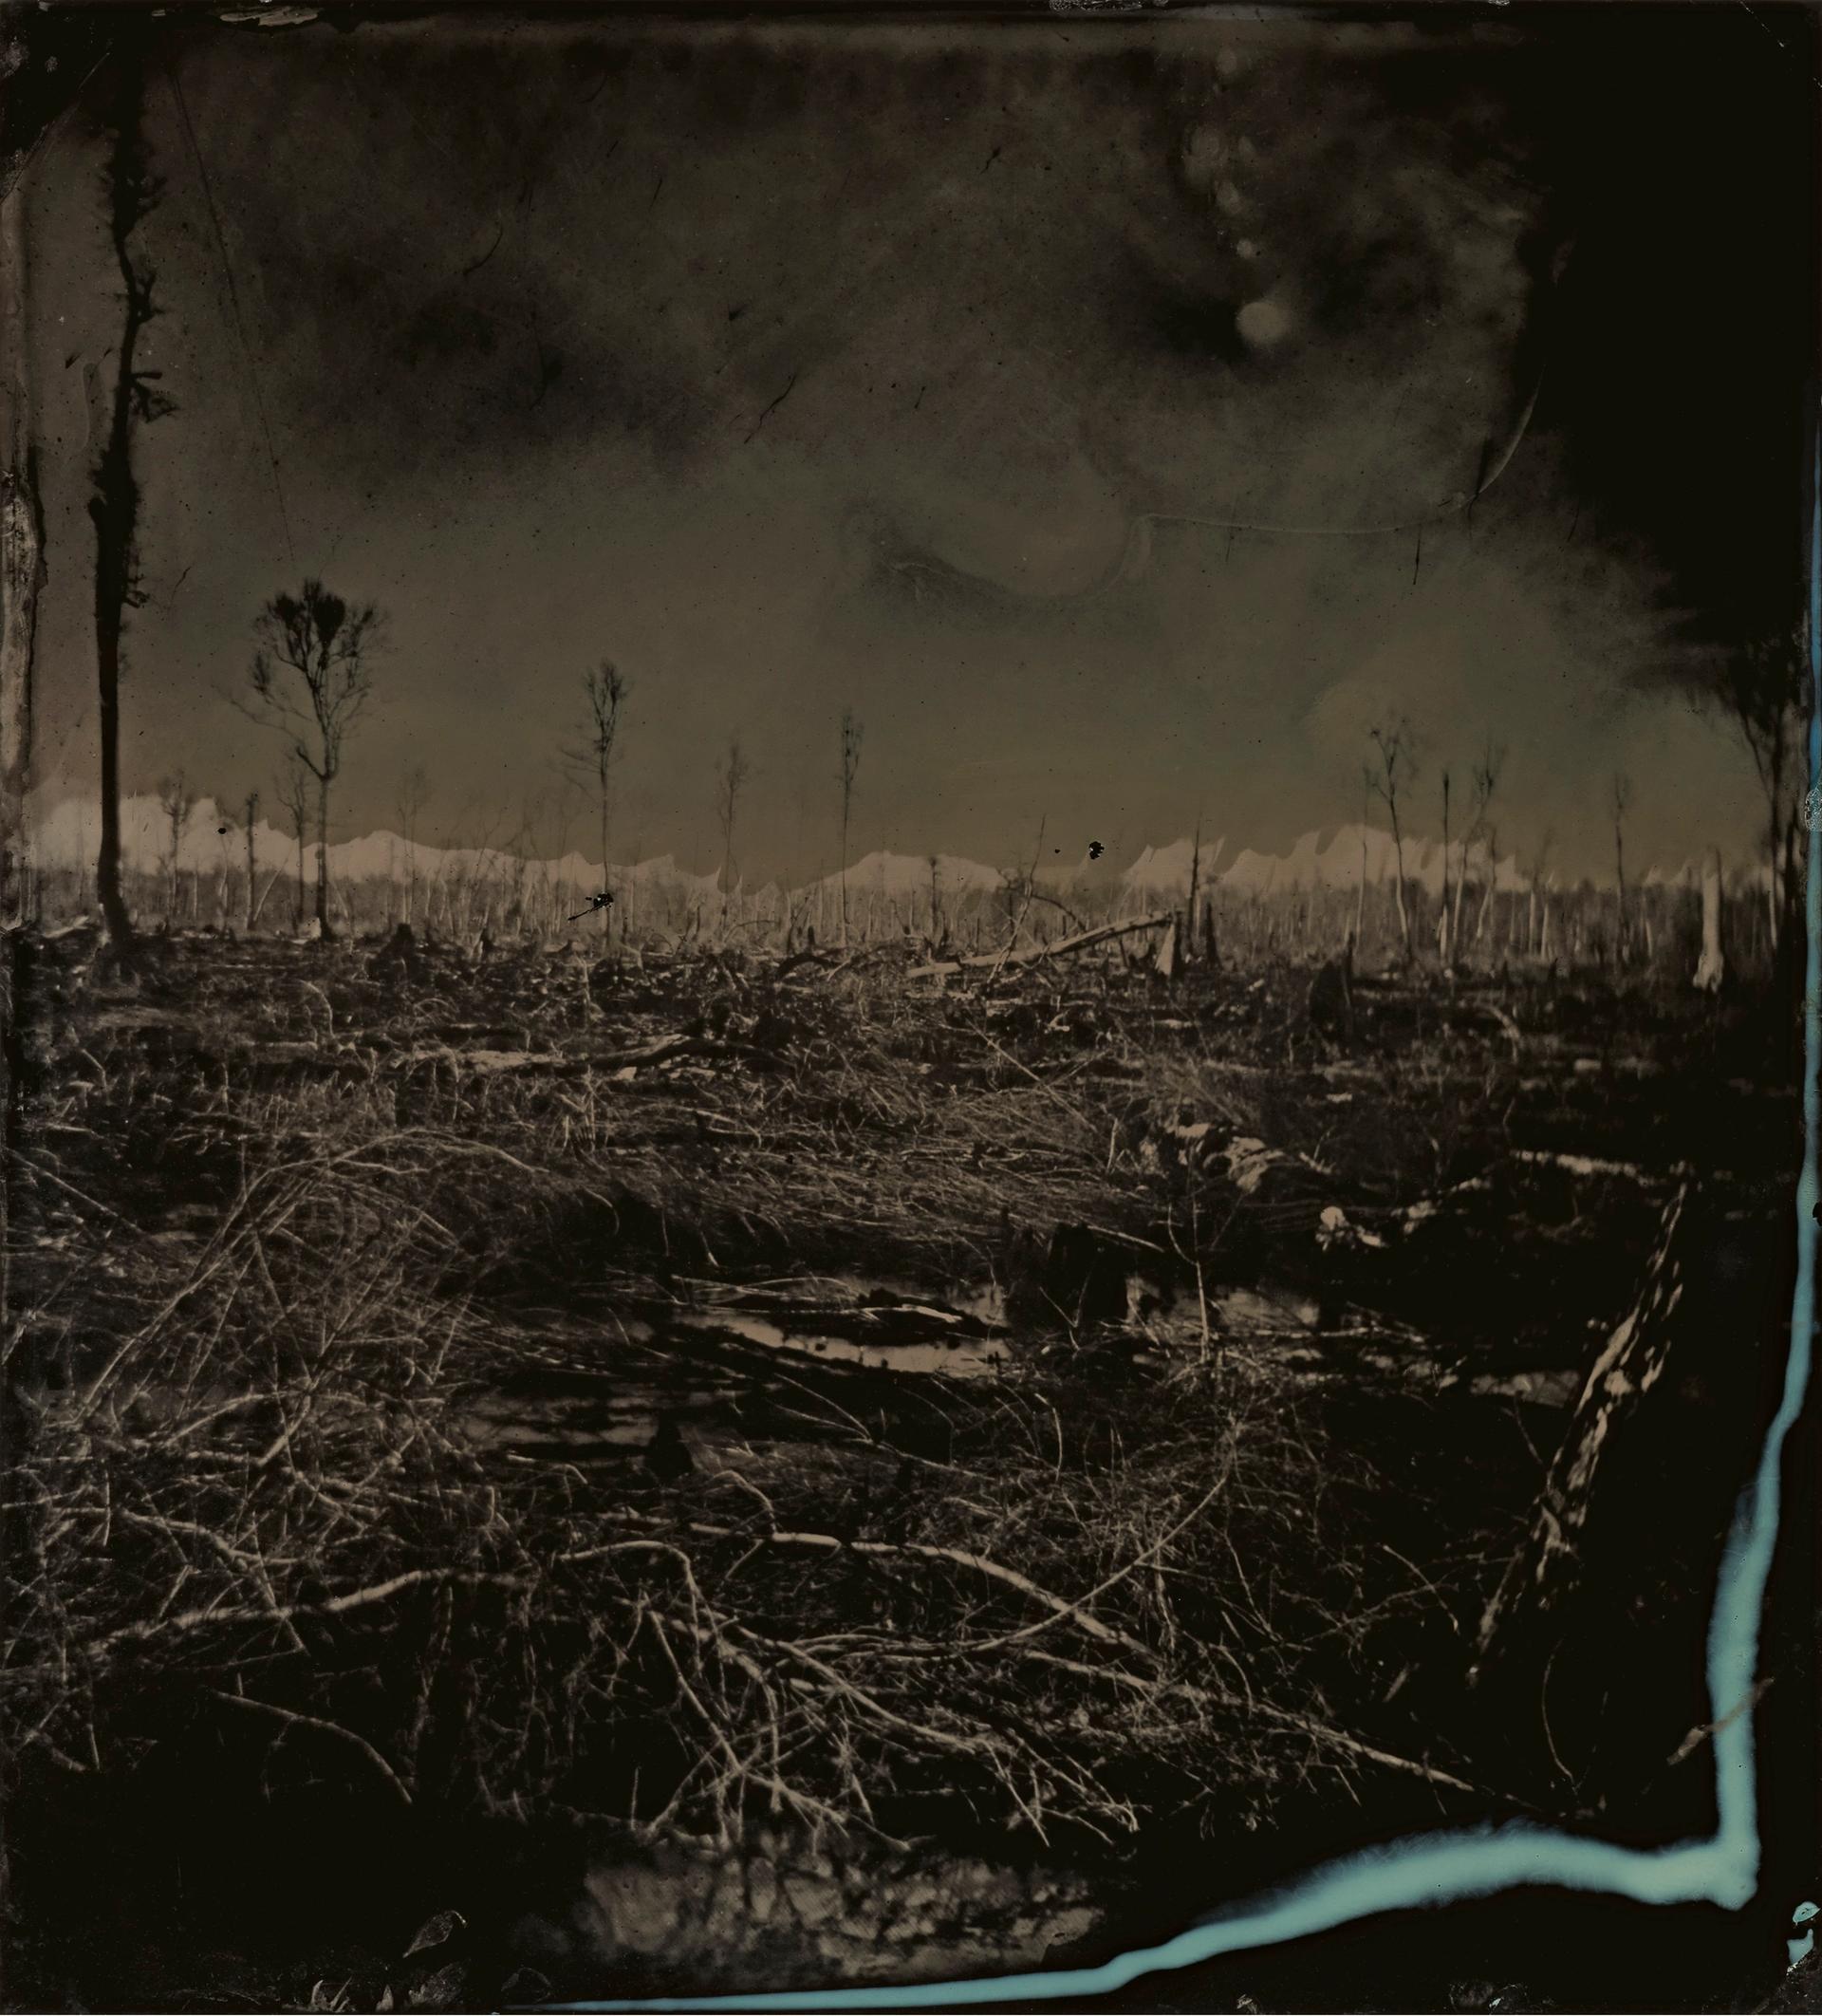 Blackwater 3, from the series Blackwater, 2008–12, Tintype © Sally Mann, courtesy of the artist and Gagosian


